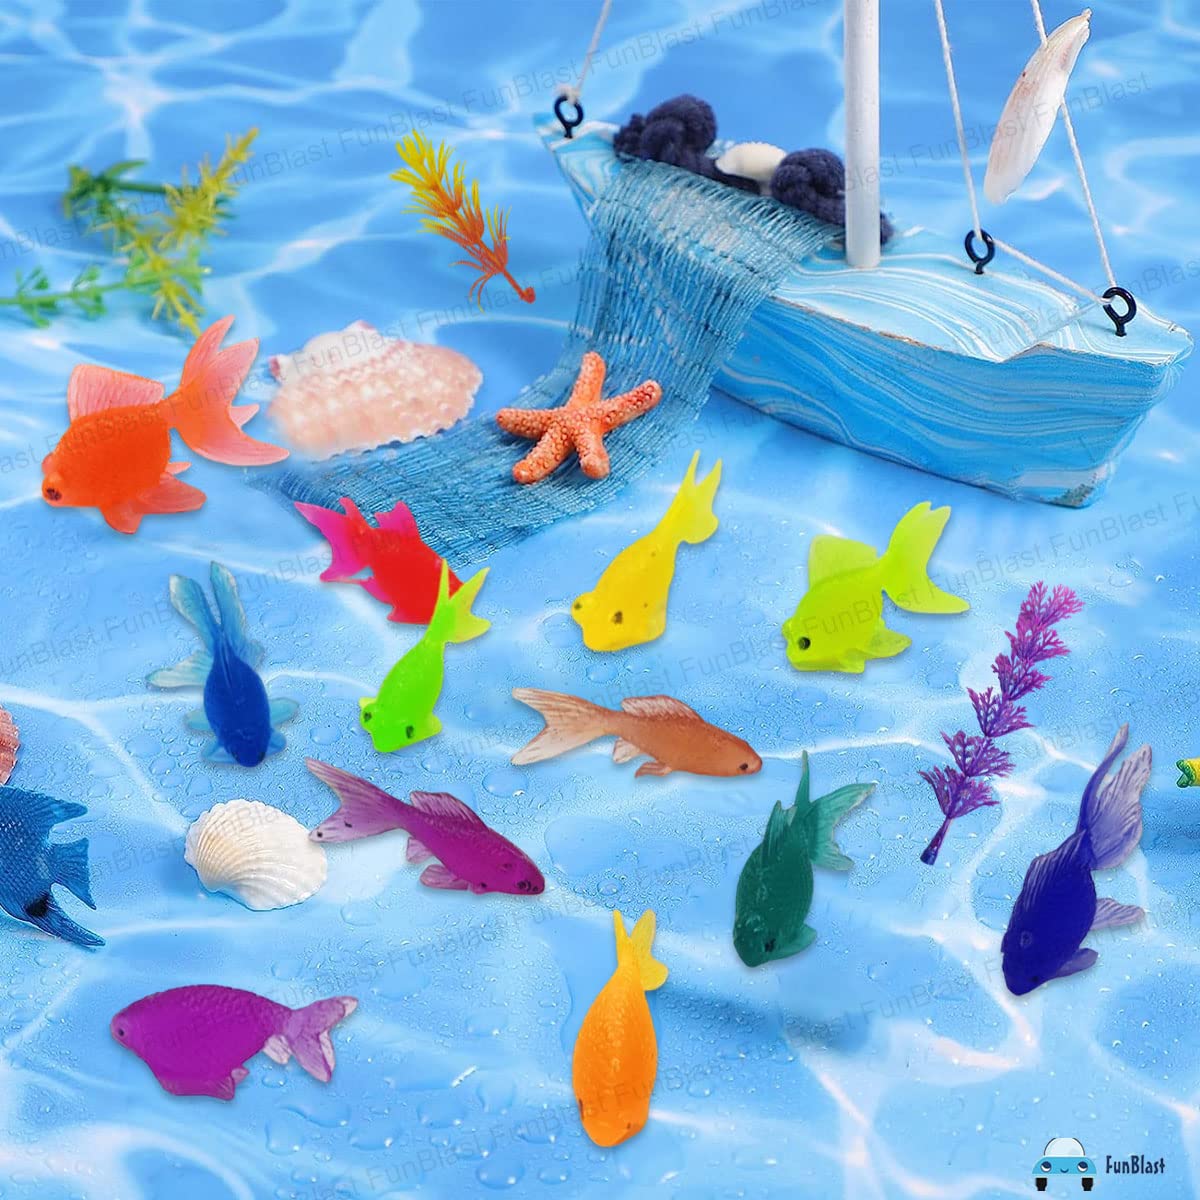 Little Cute Fish Toys – Pack of 12 Pcs Aquatic Sea Animal Toy for Kids, Sea  Marine Animal Figure Playing Set for Kids, Sea Creatures Action Toys for